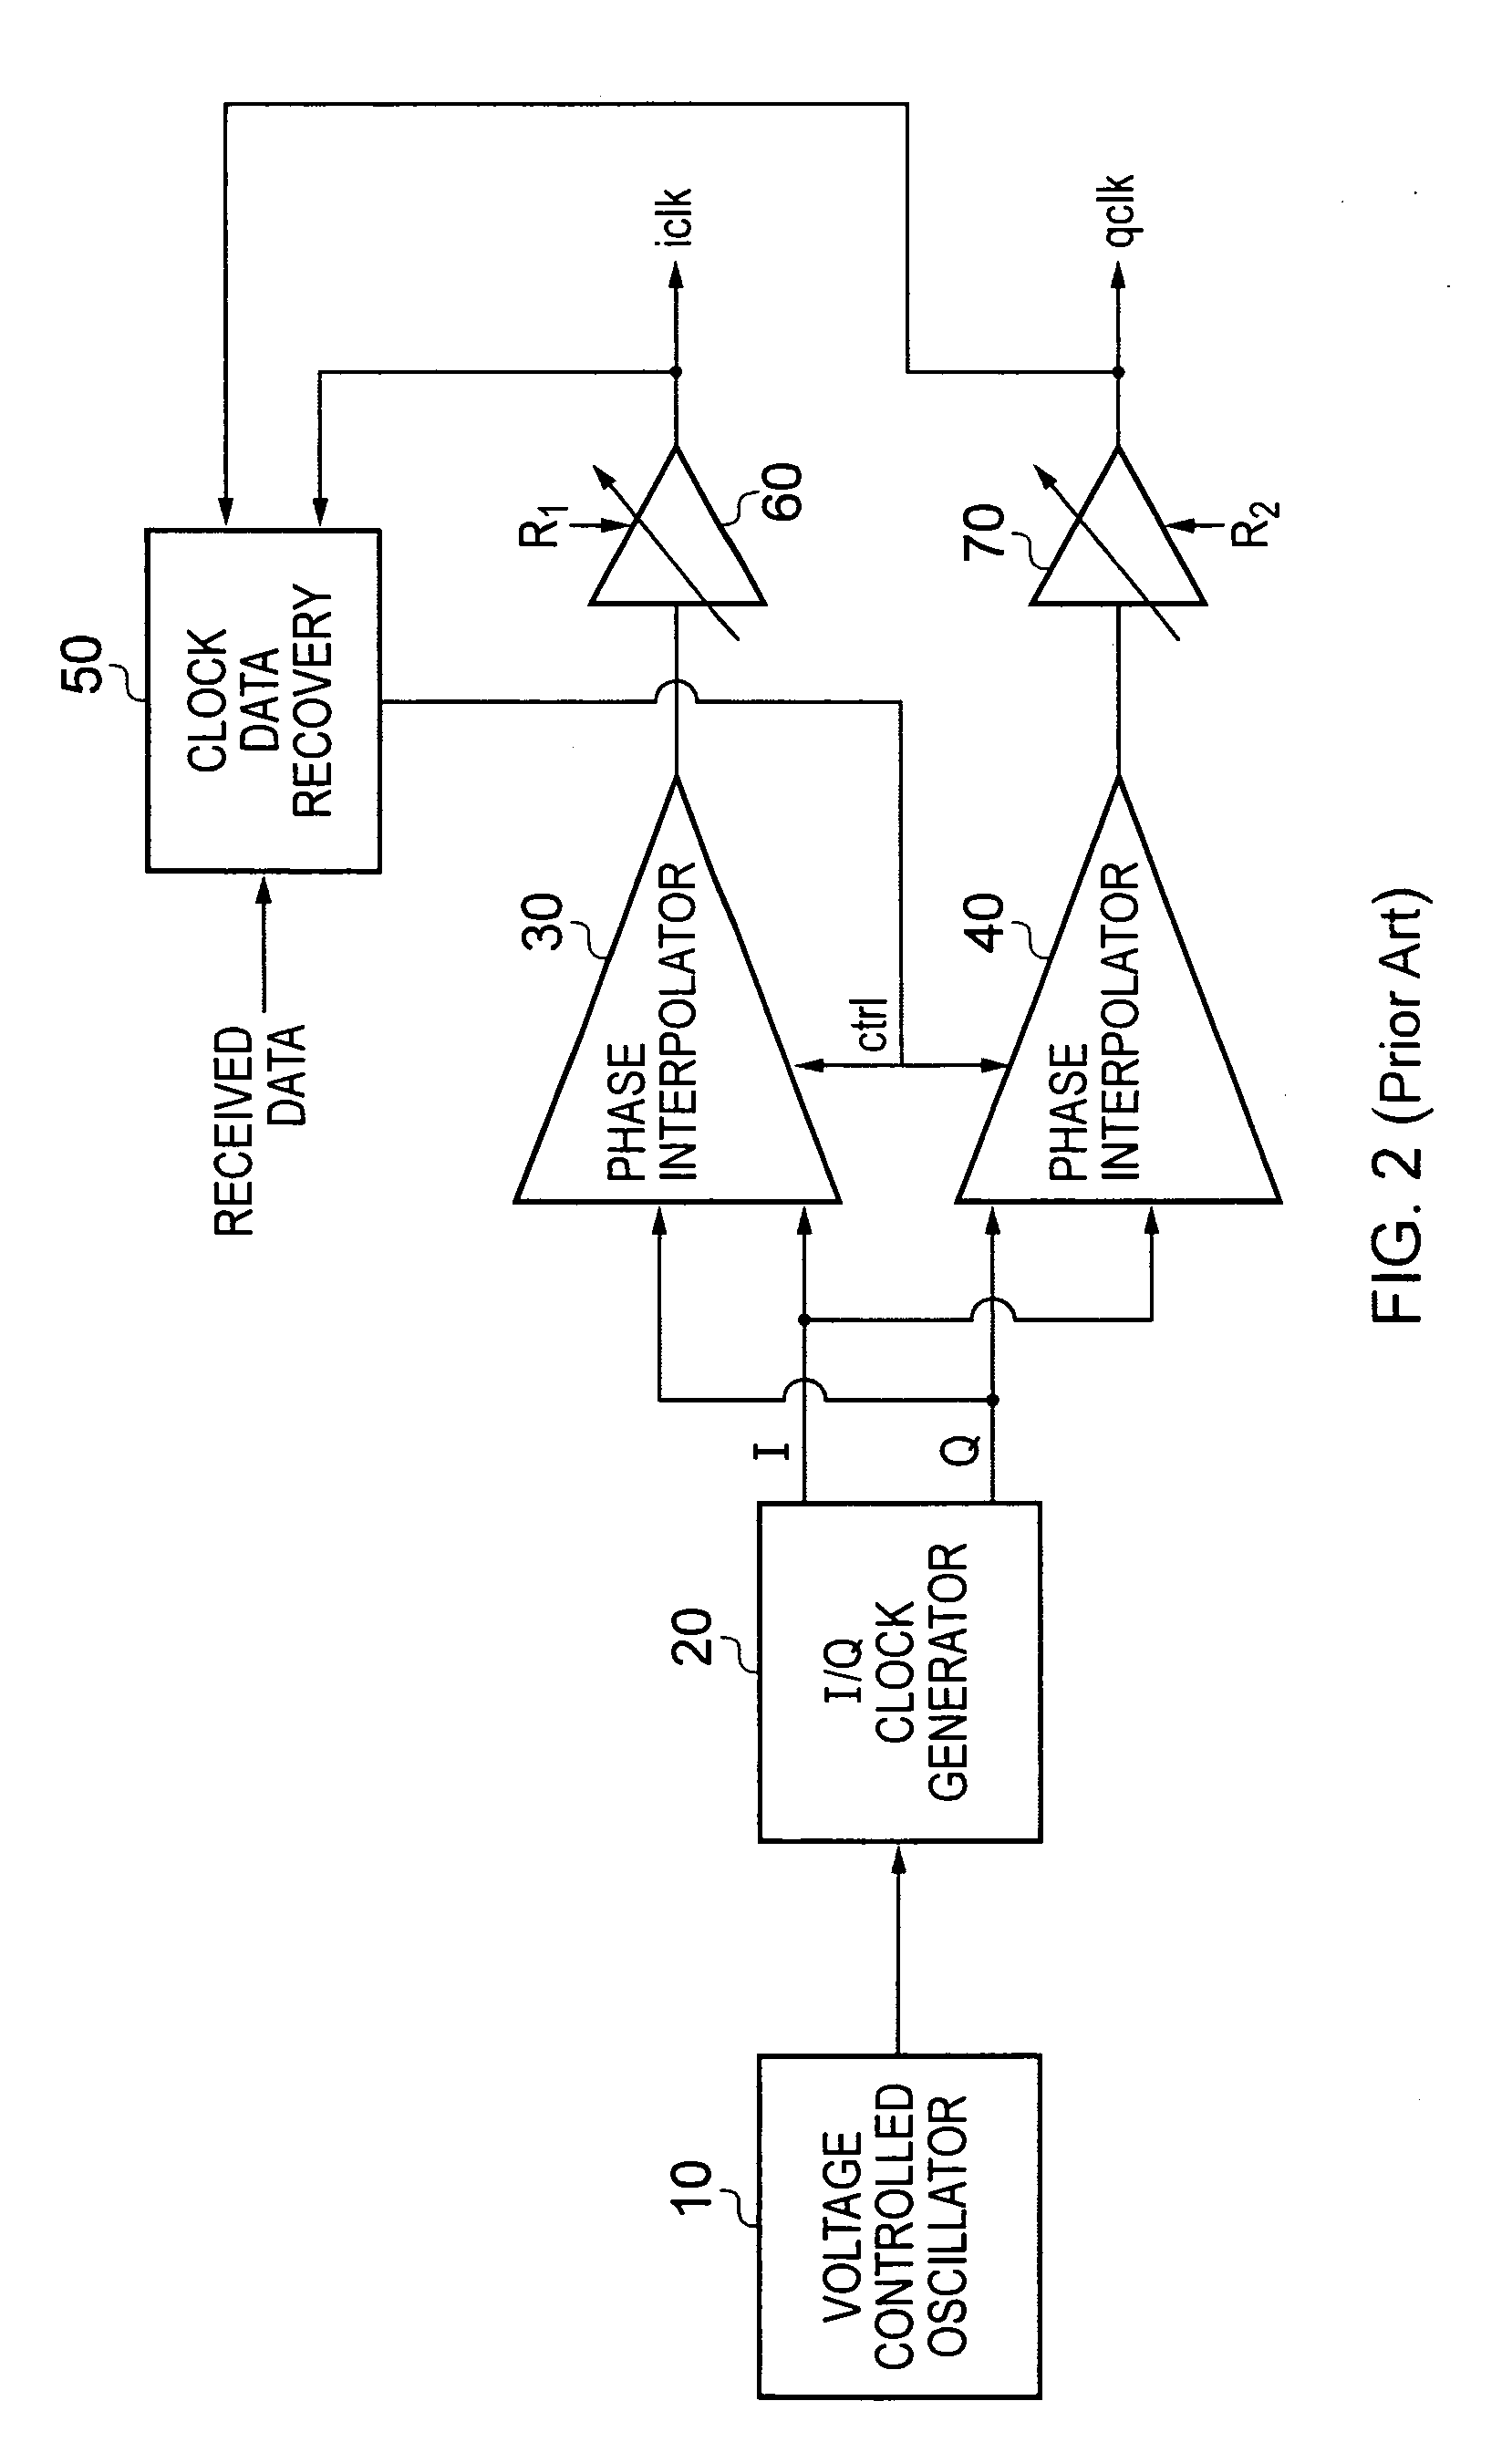 Method of processing signal data with corrected clock phase offset